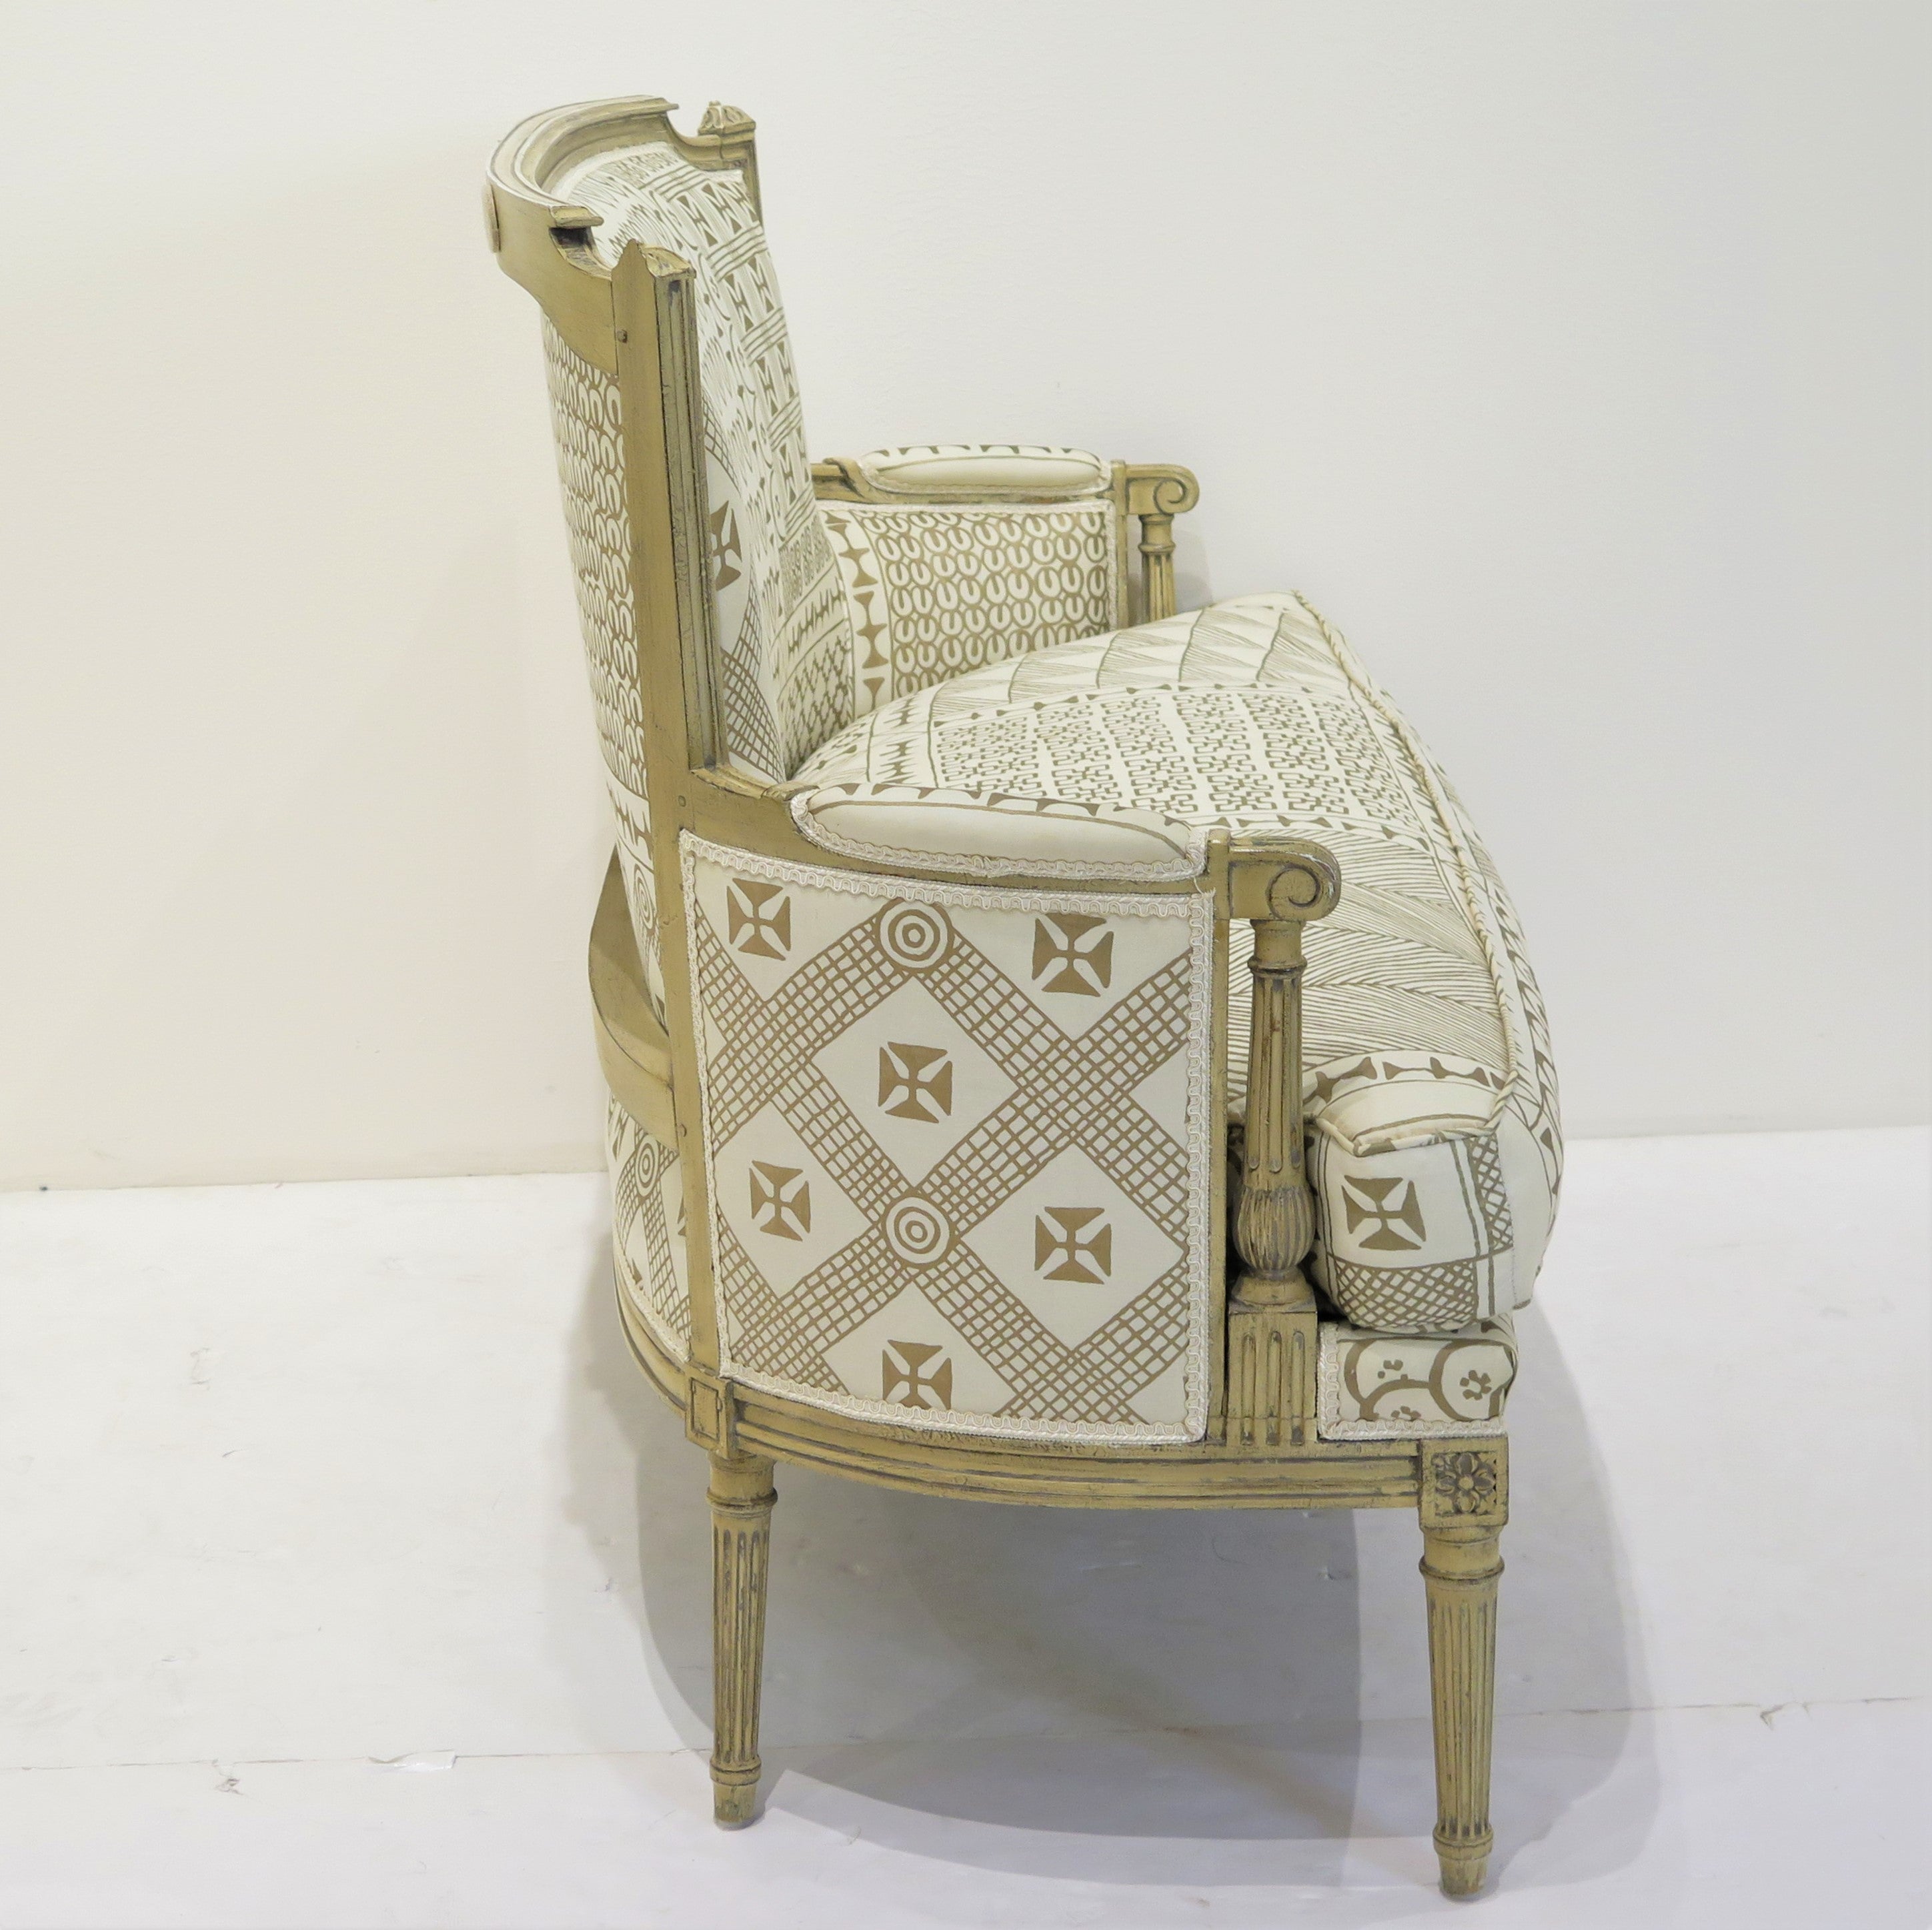 Louis XVI Style Painted Settee in Fortuny "Ashanti" Upholstery